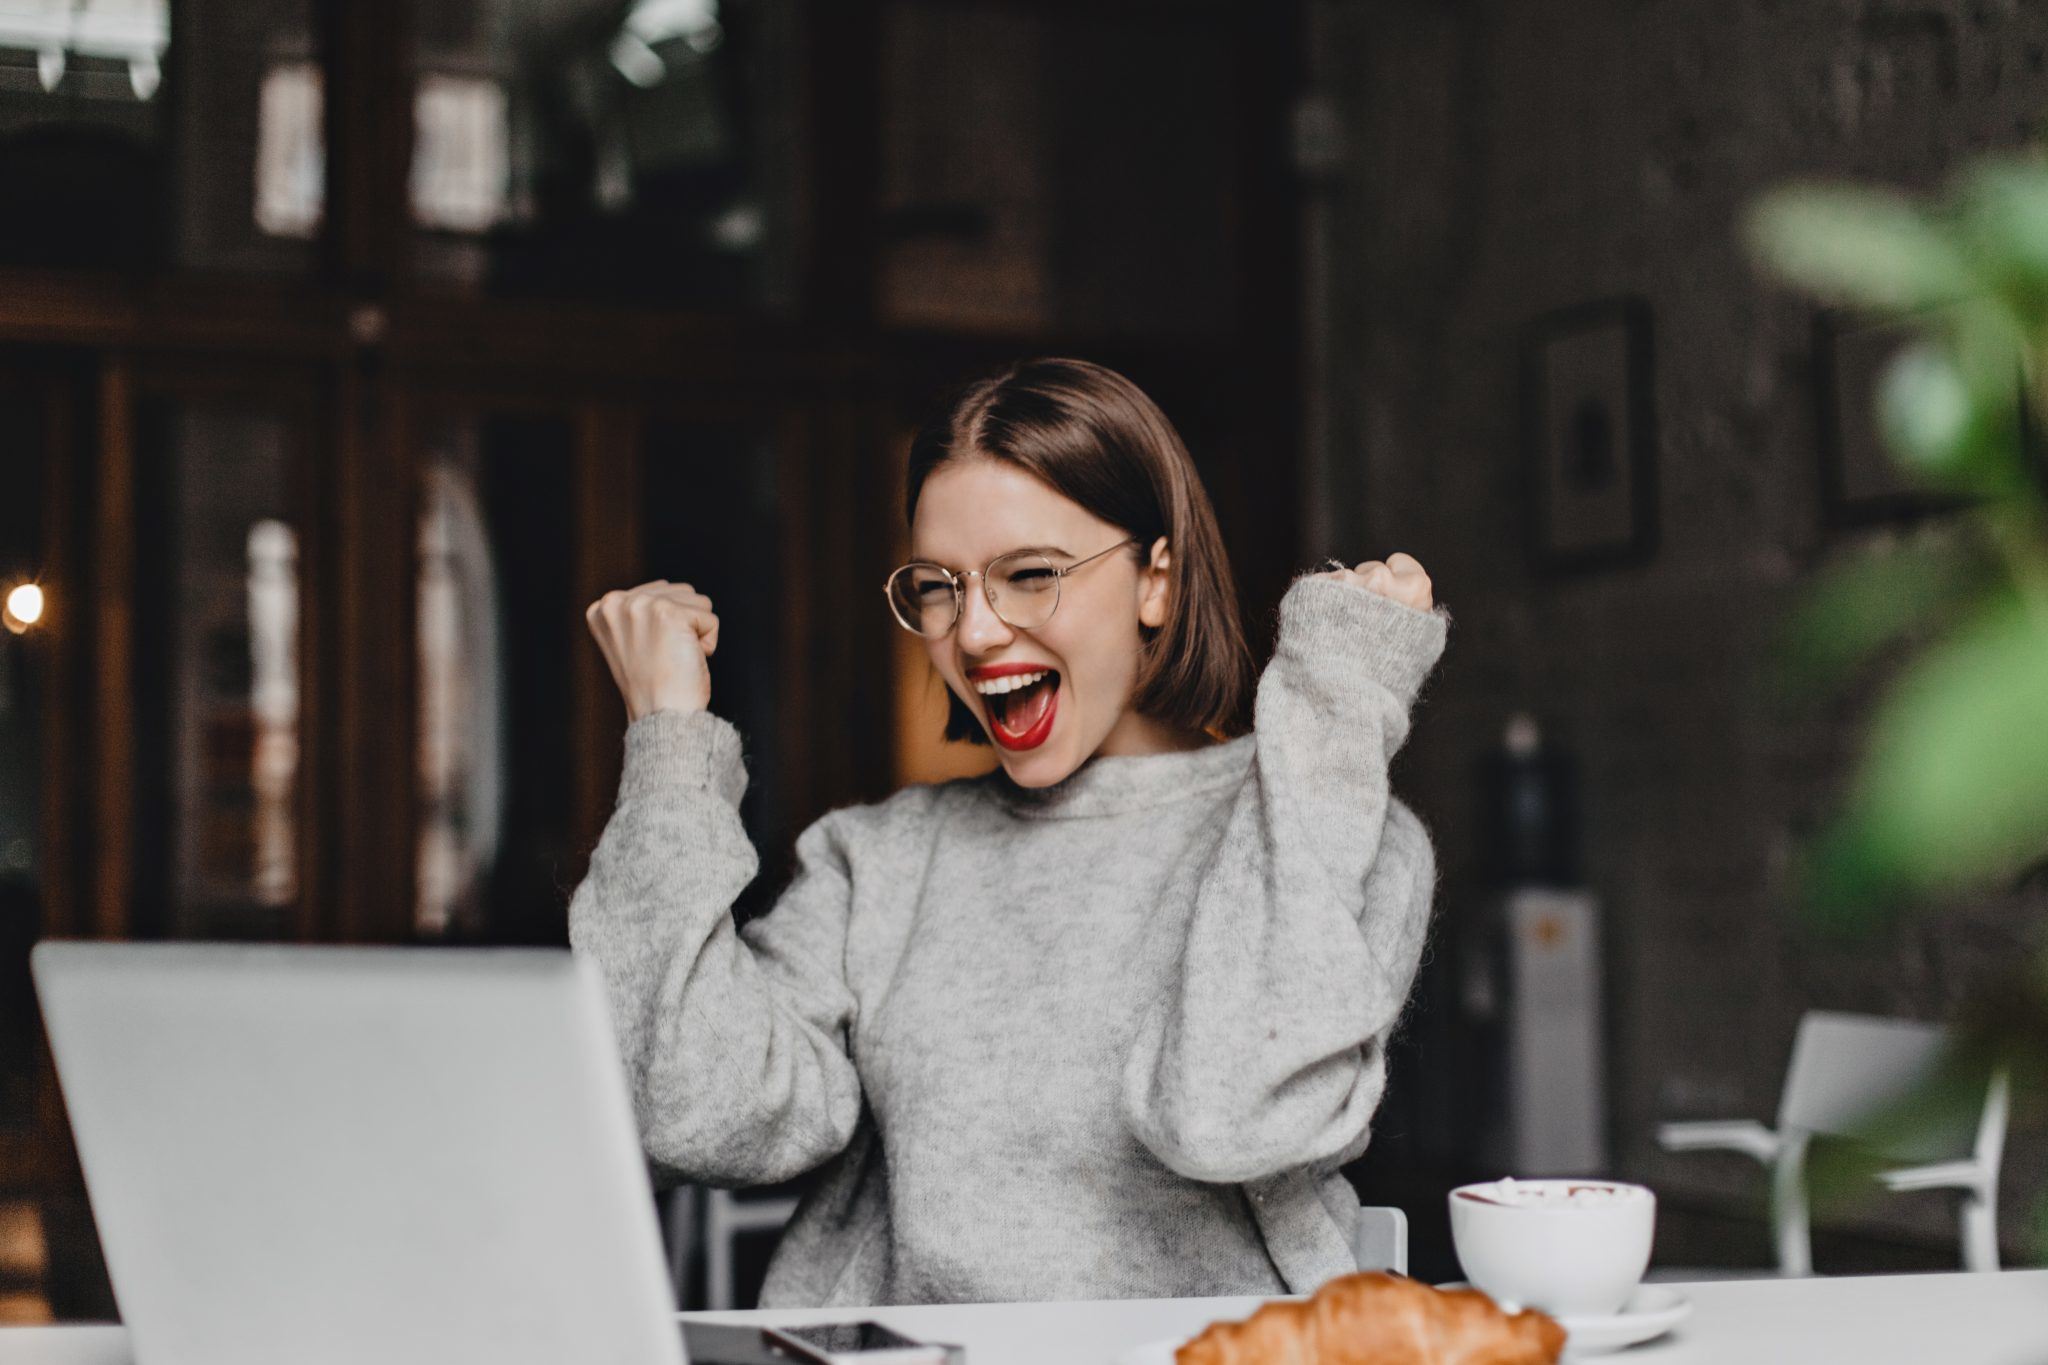 happy woman glasses makes winning gesture sincerely rejoices lady with red lipstick dressed gray sweater looking laptop scaled.jpg?resolution=1536,1